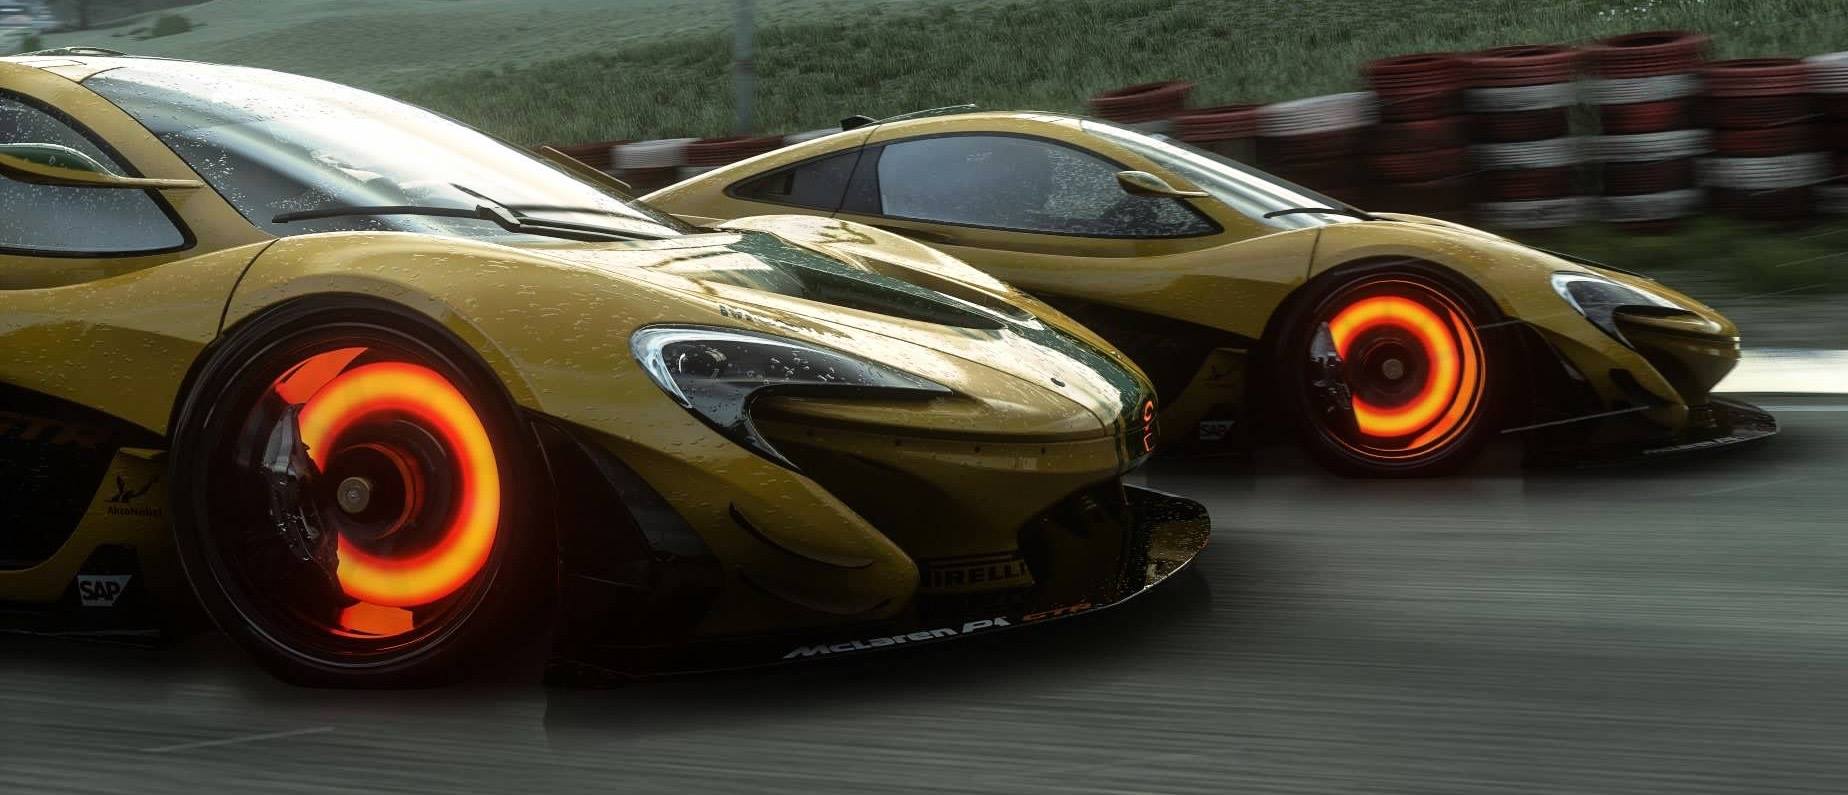 Stunning McLaren P1 GTR Pictures From PS439;s DriveClub 